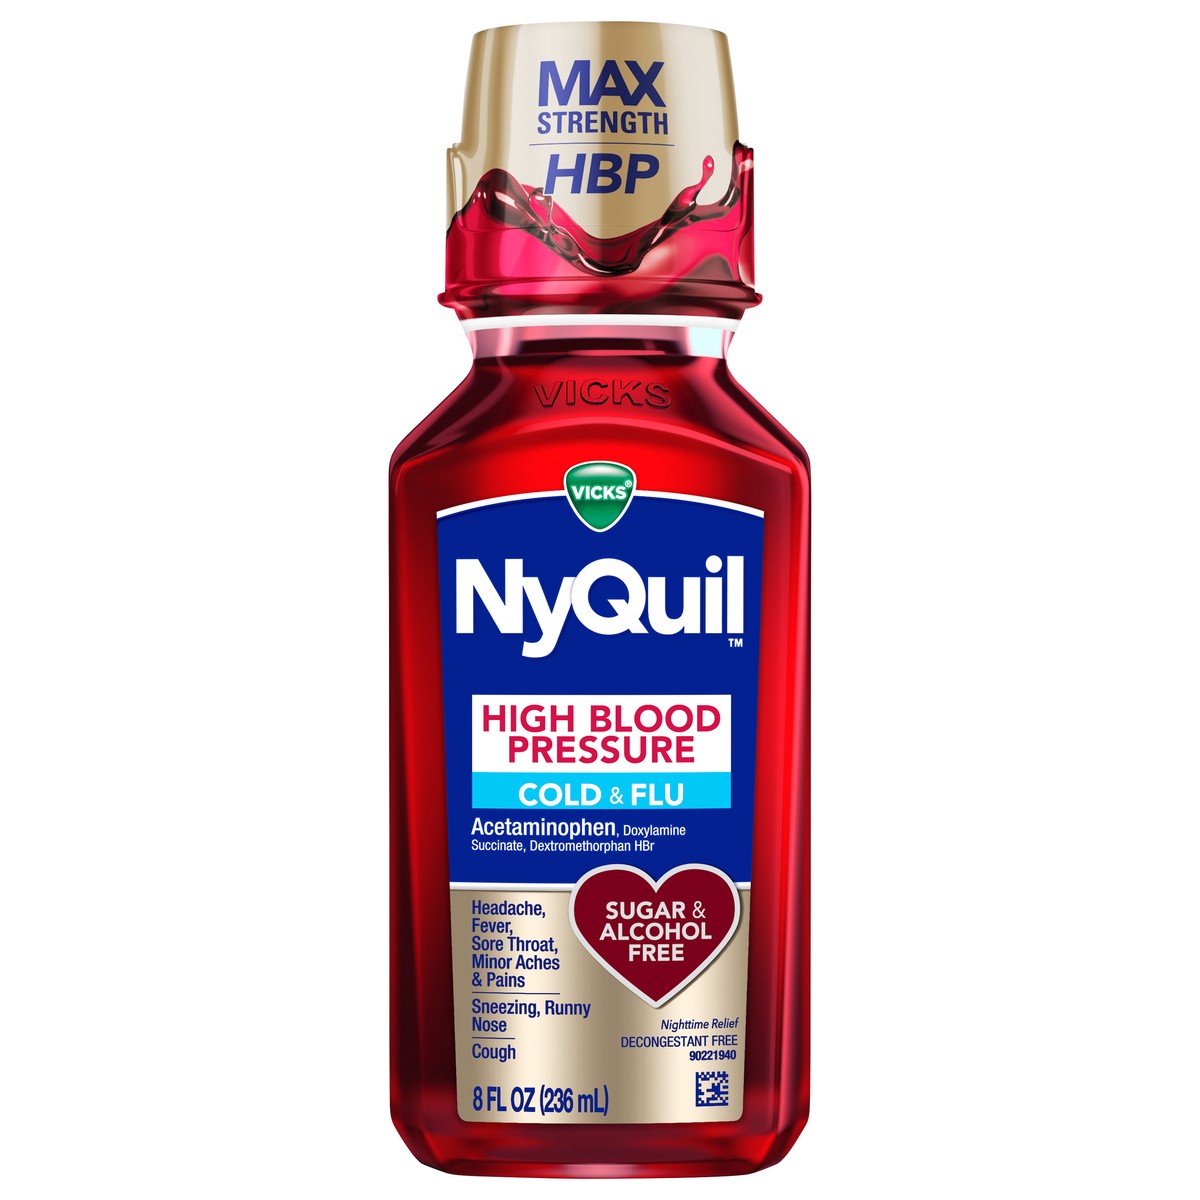 slide 1 of 2, VICKS NyQuil High Blood Pressure Liquid Cold, Cough, and Flu Relief (Fast-Acting, Max Strength Relief of Sore Throat, Fever, Cough, Congestion, Runny Nose, Sinus Pressure, Sneezing, Minor Aches & Pains), 8 oz